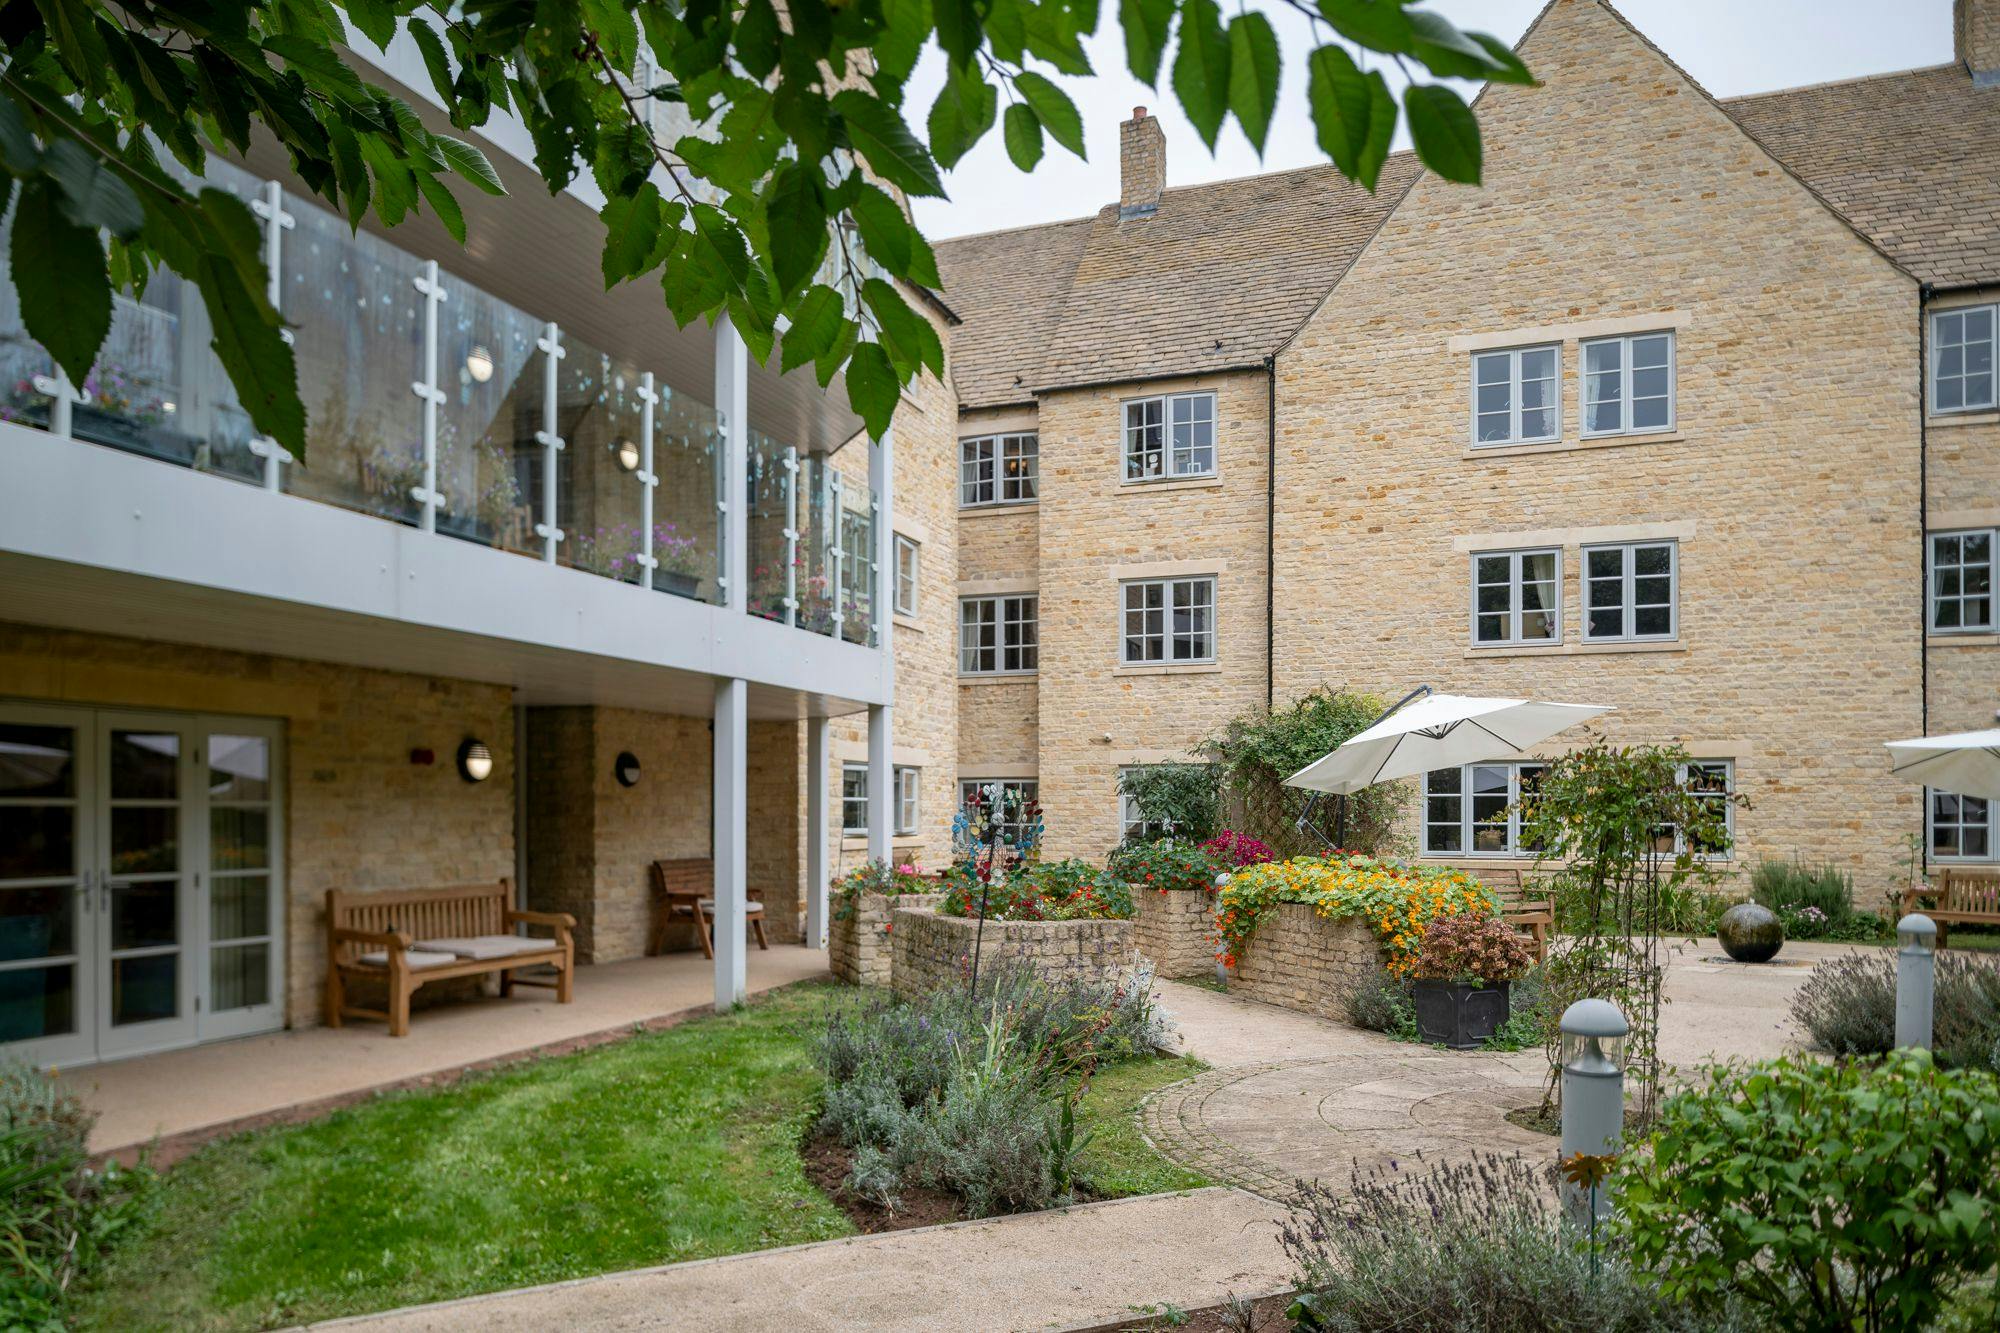 Exterior at Edwardstow Court Care Home in Stow-on-the-Wold, Cotswold